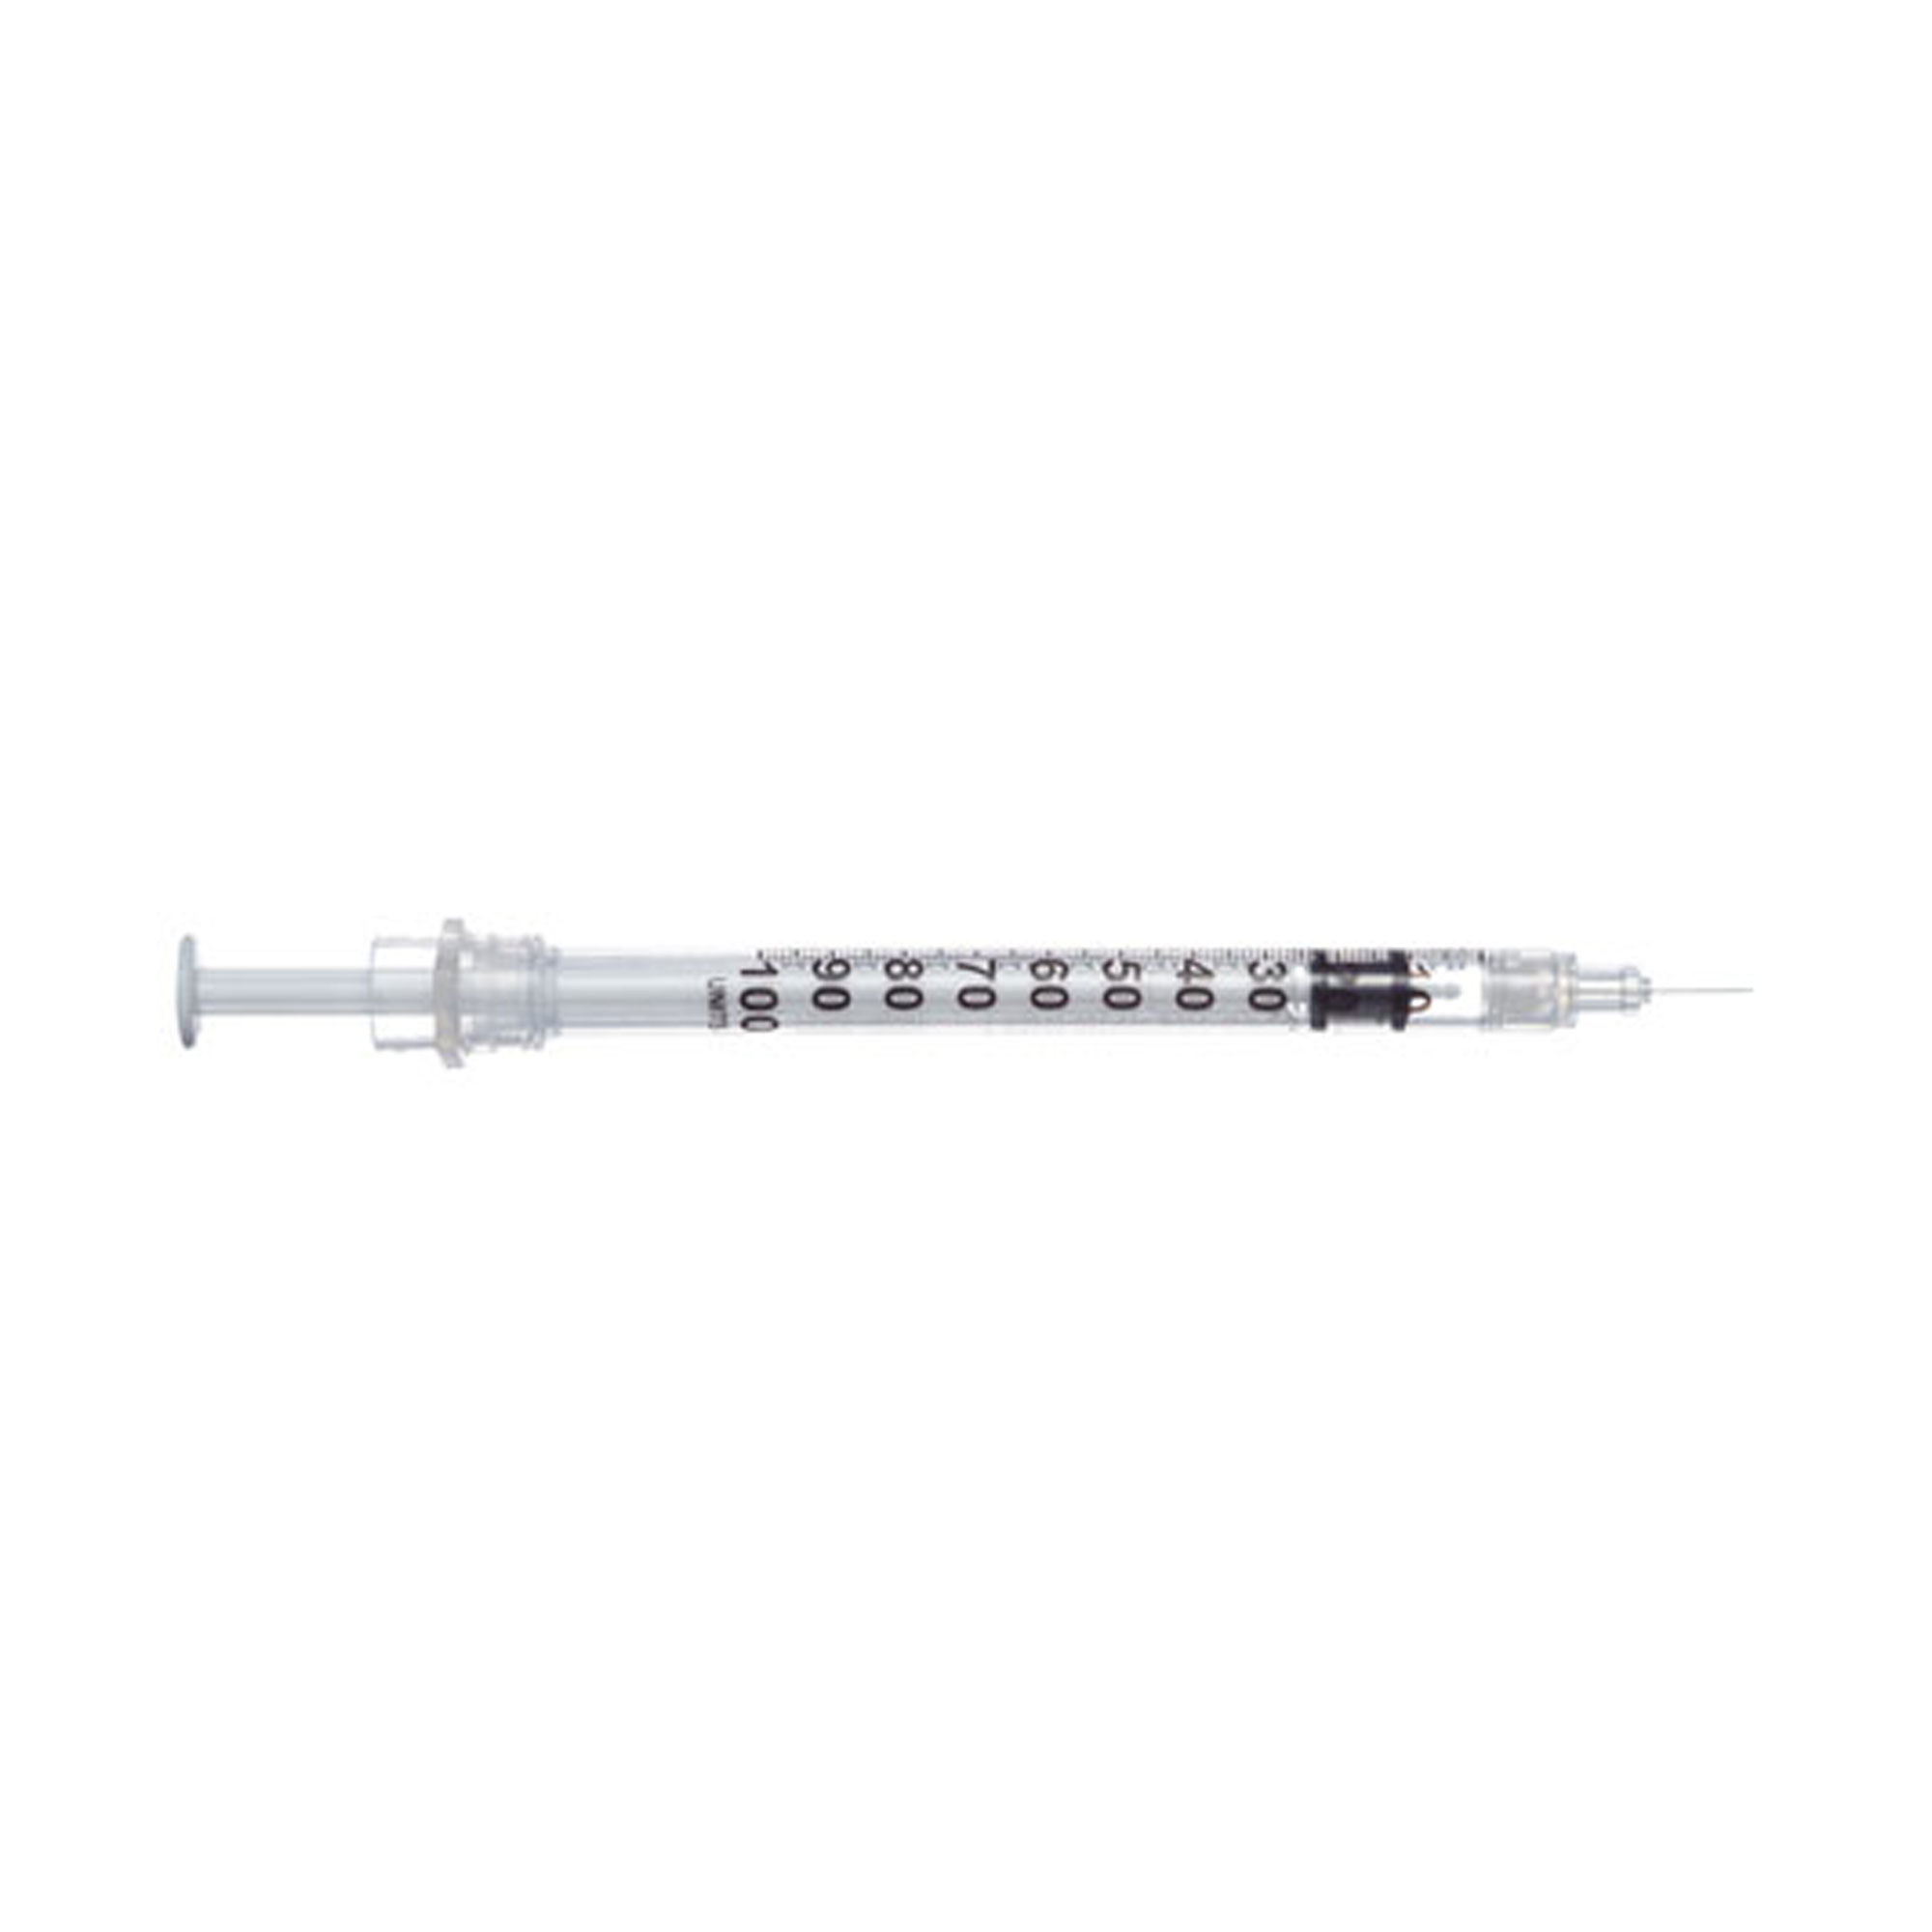 SOL - CARE Insulin Safety Syringe with Fixed Needle 0.5ml 30gx5/16